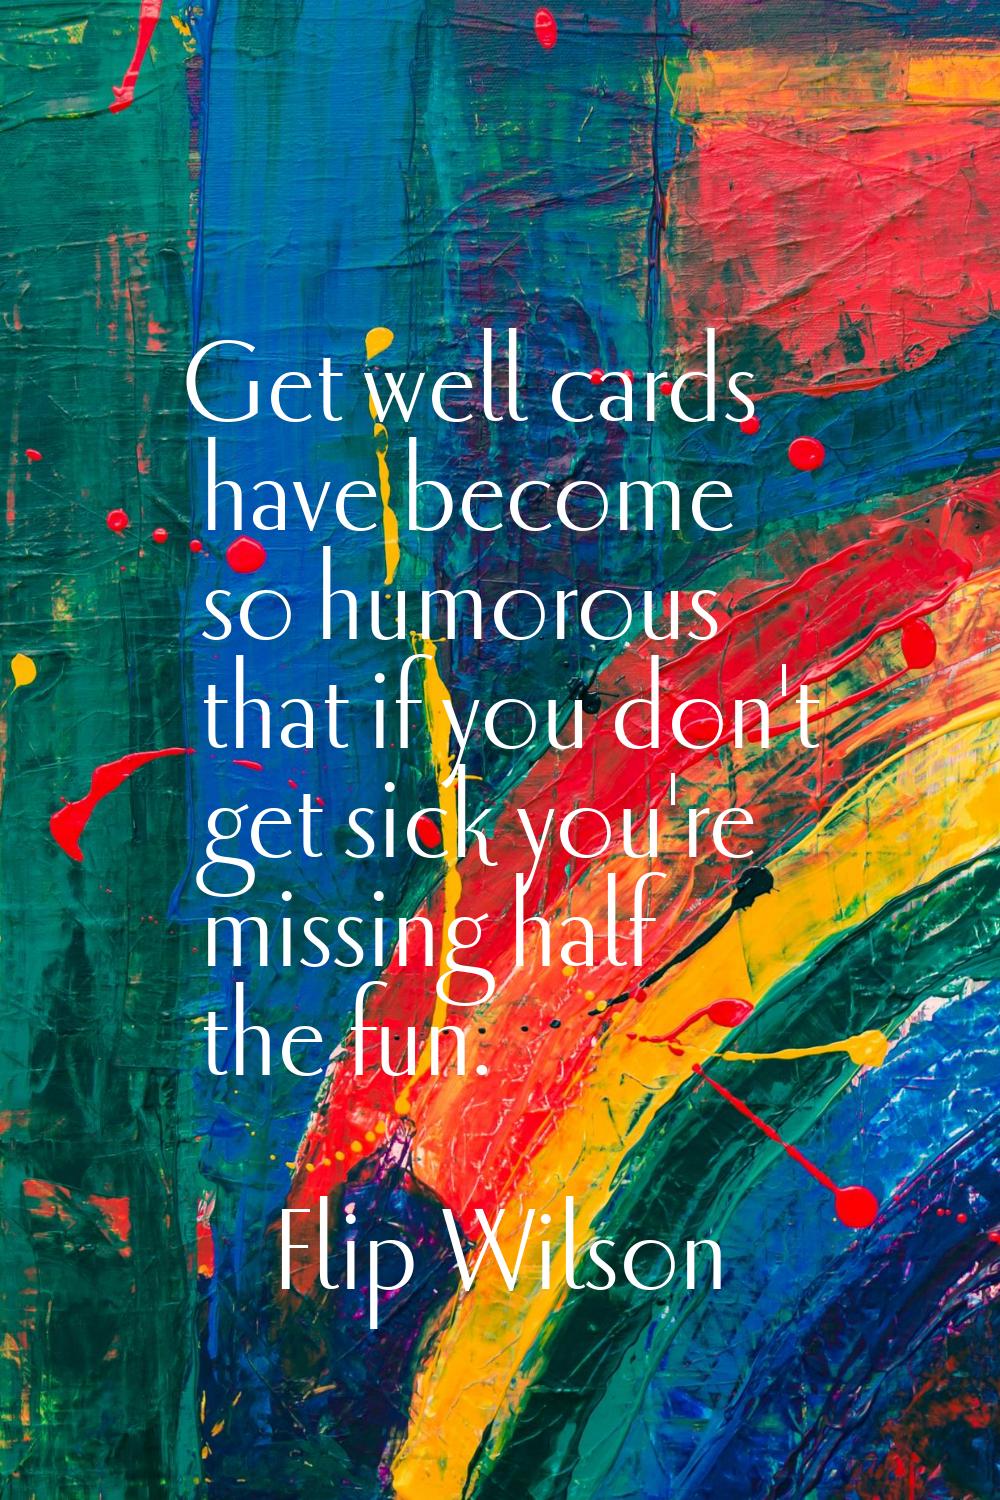 Get well cards have become so humorous that if you don't get sick you're missing half the fun.